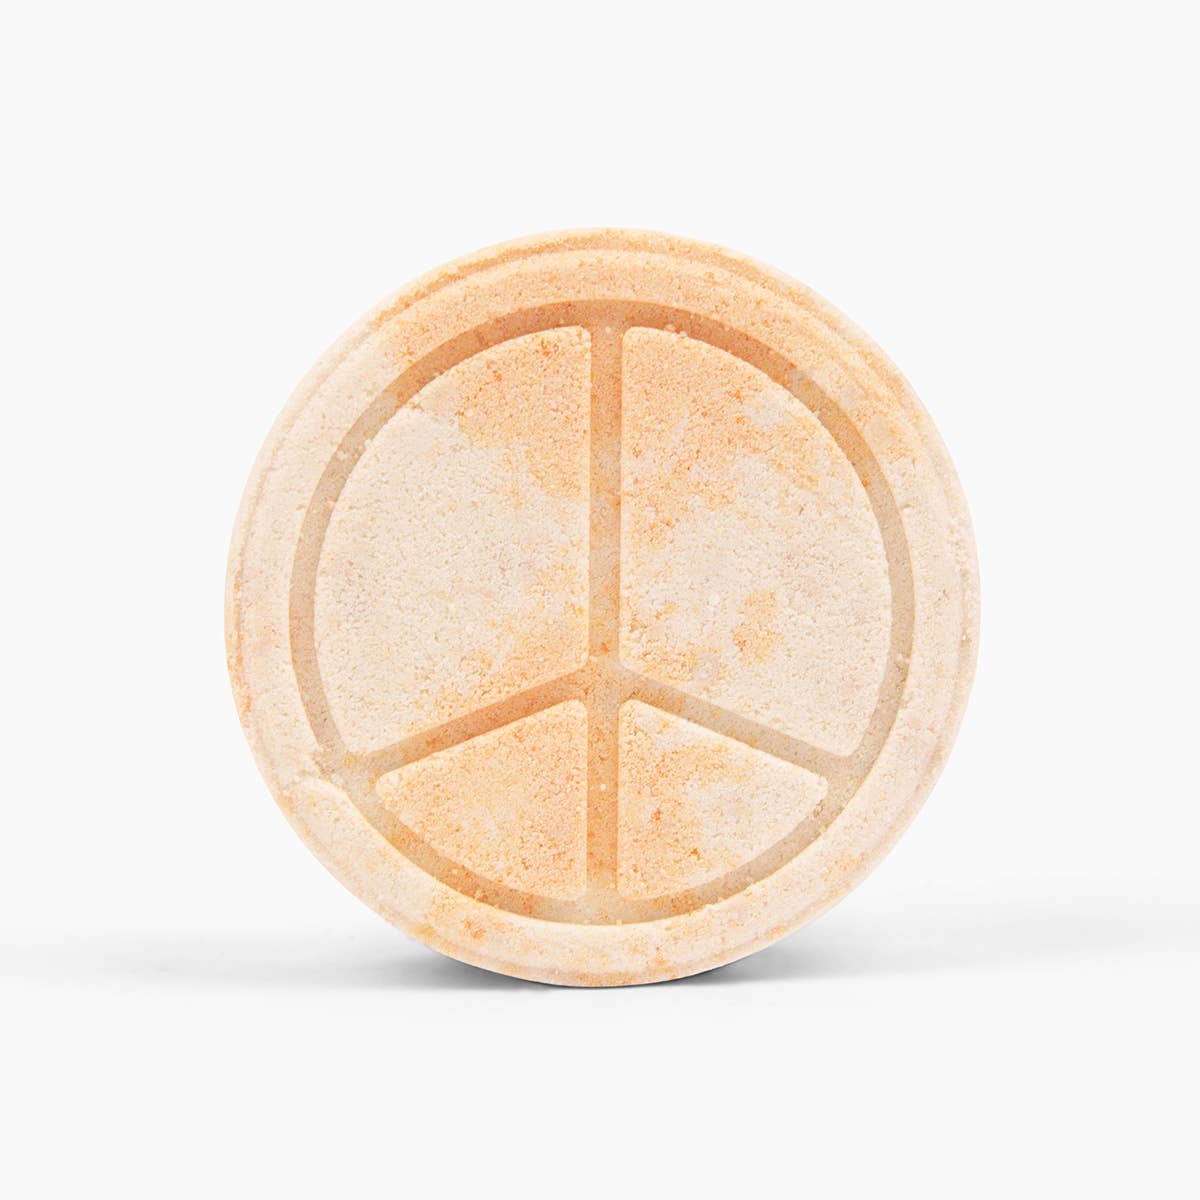 Shea & Cocoa Butter Bath Bombs in Biodegradable Packaging